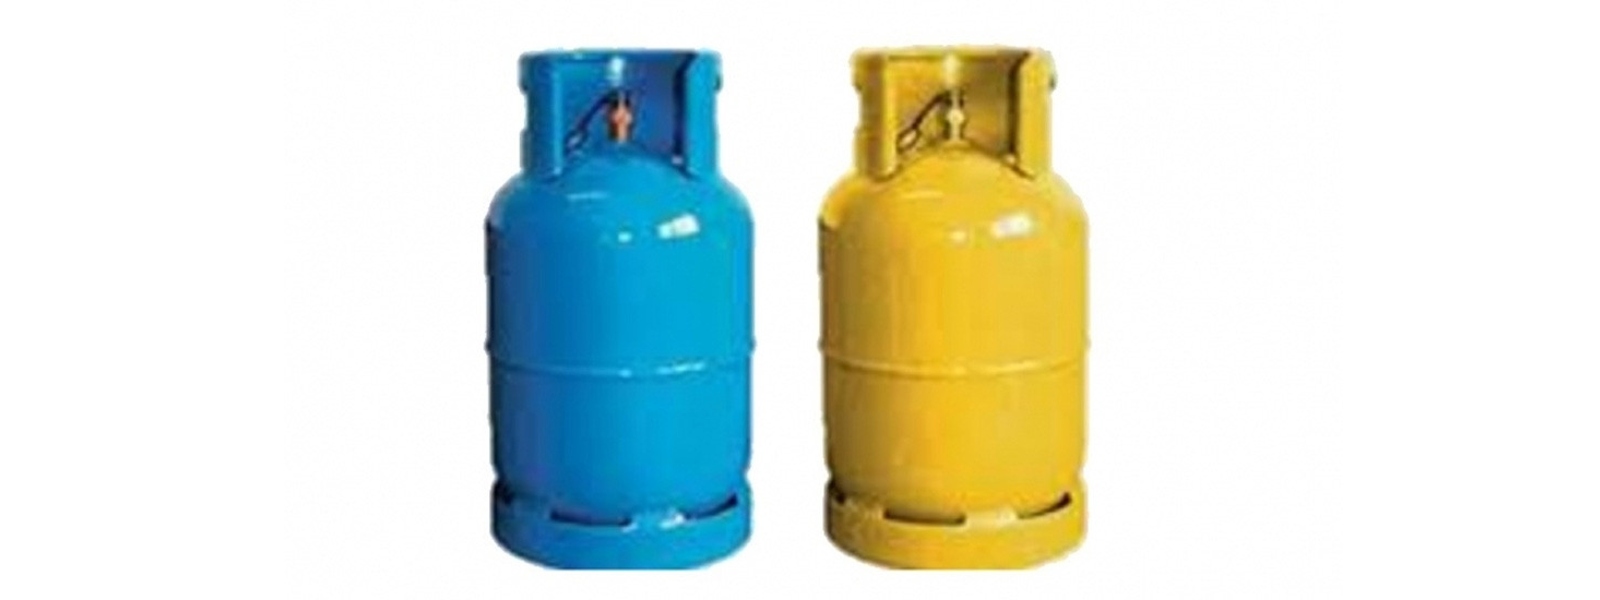 CAA consents to releasing gas cylinders from tomorrow